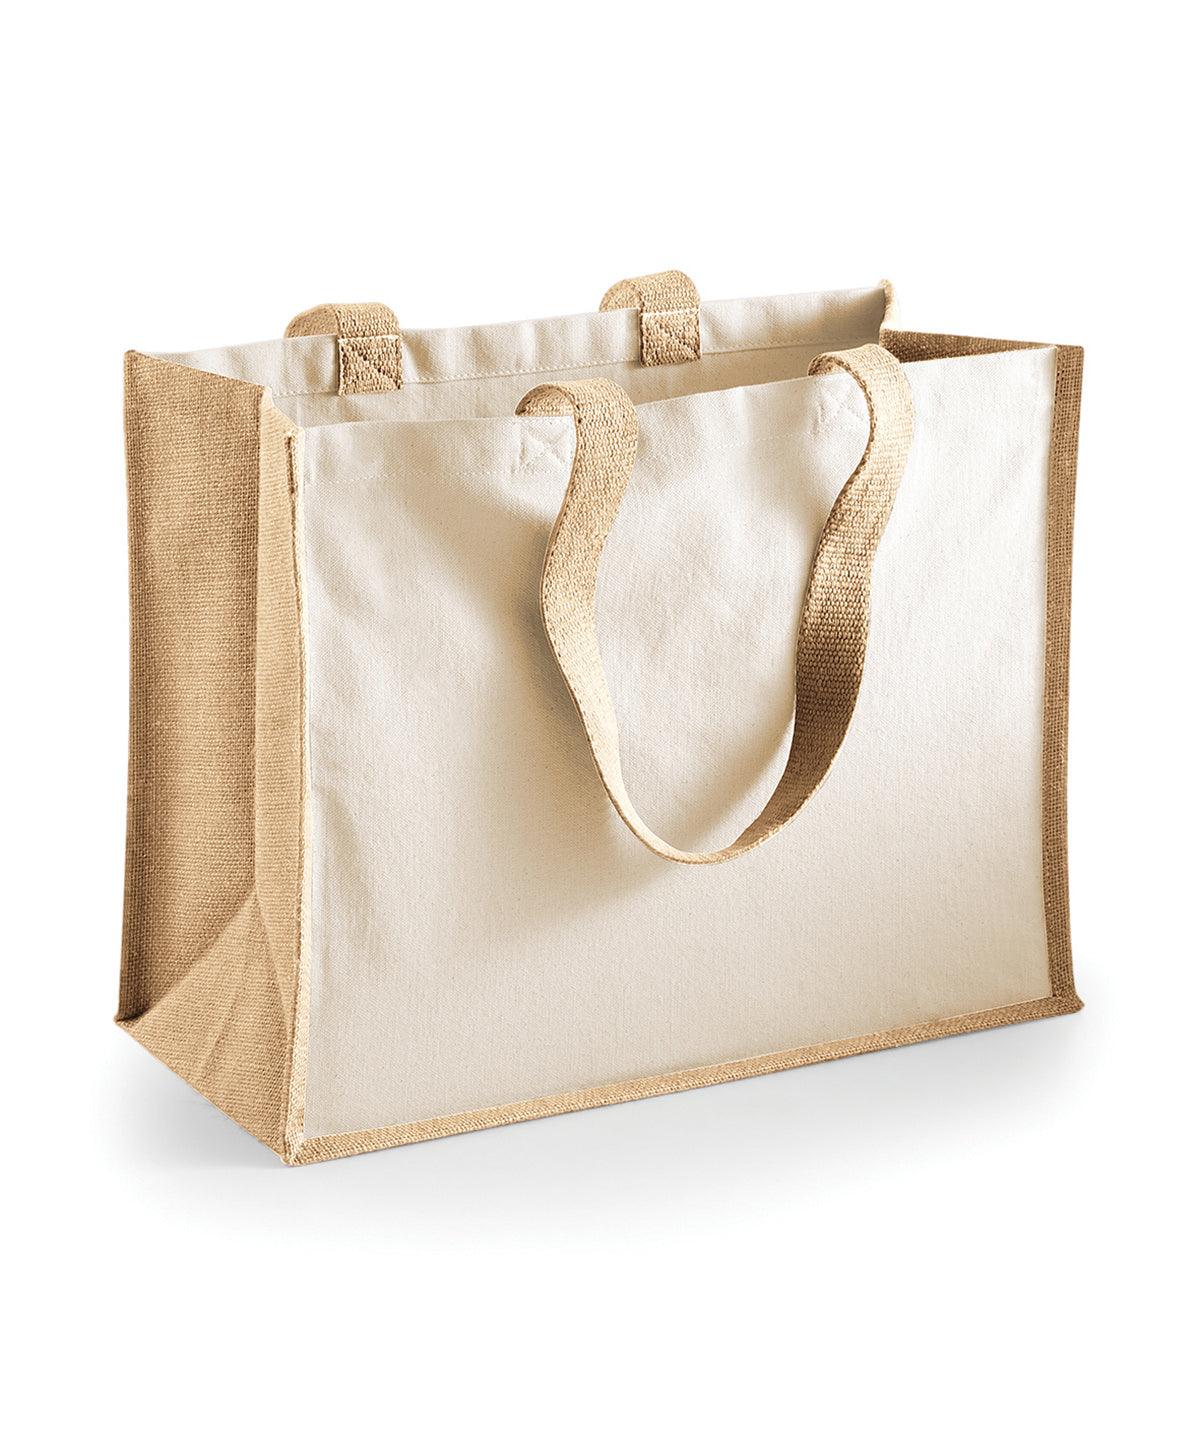 Natural - Printers jute classic shopper Bags Westford Mill Bags & Luggage, Must Haves Schoolwear Centres